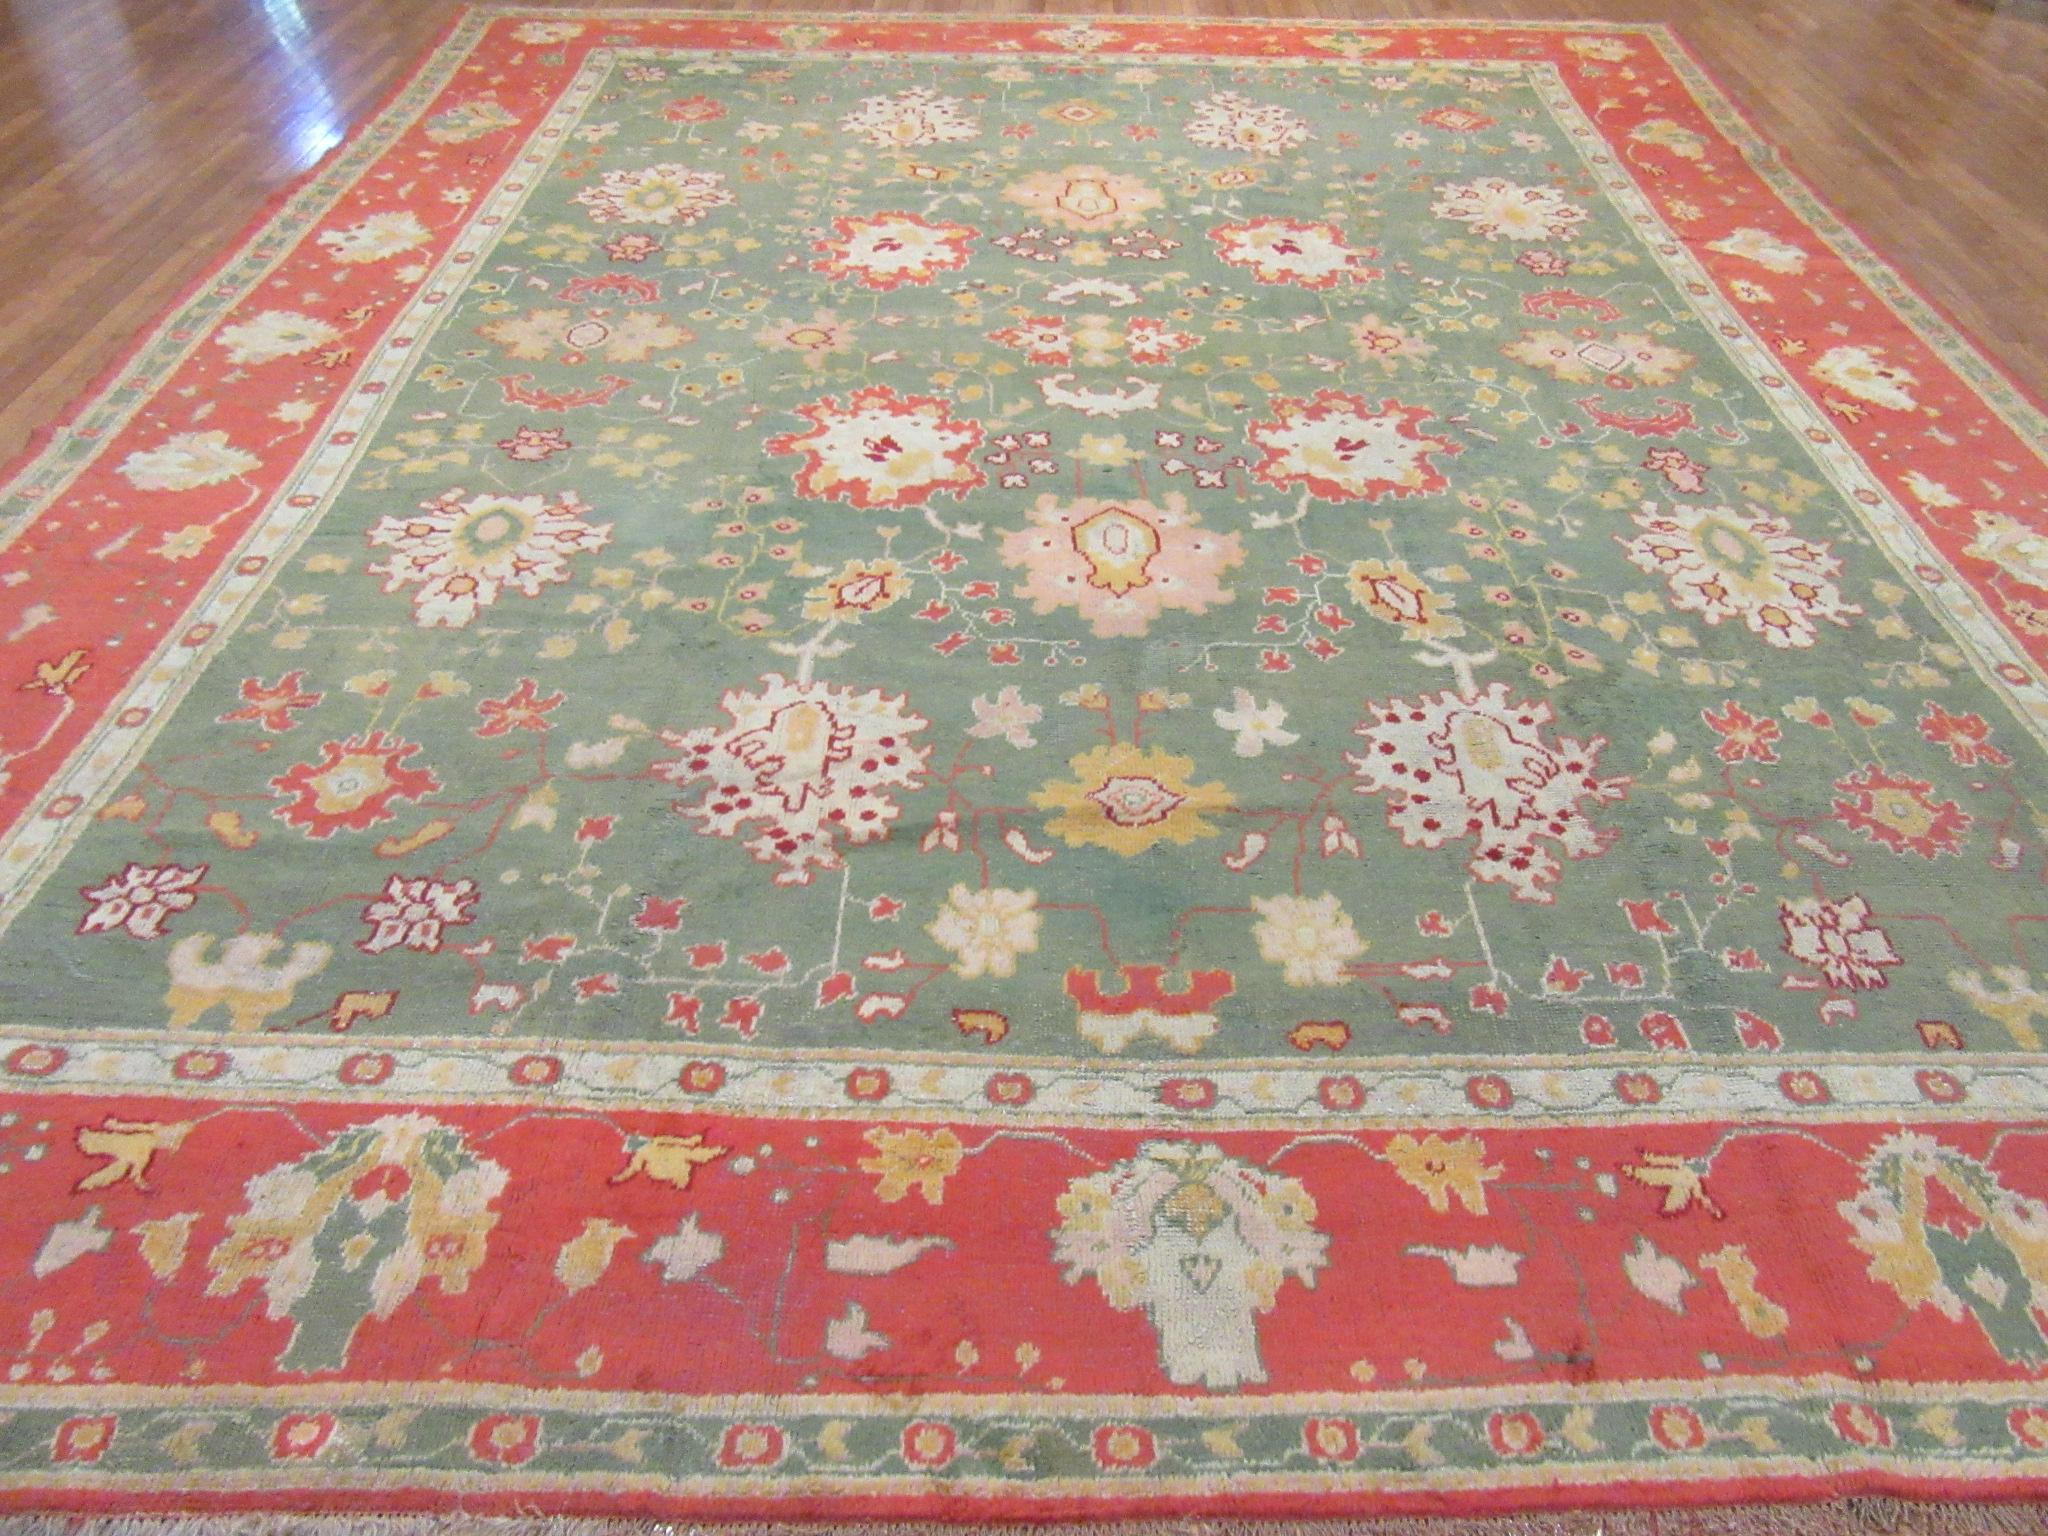 This is an antique hand knotted rug from Turkey. It is made with wool on a cotton foundation in the village of Oushak with rich primary colors in a simple all-over pattern on a green color field and red border. It would enhance the look of any